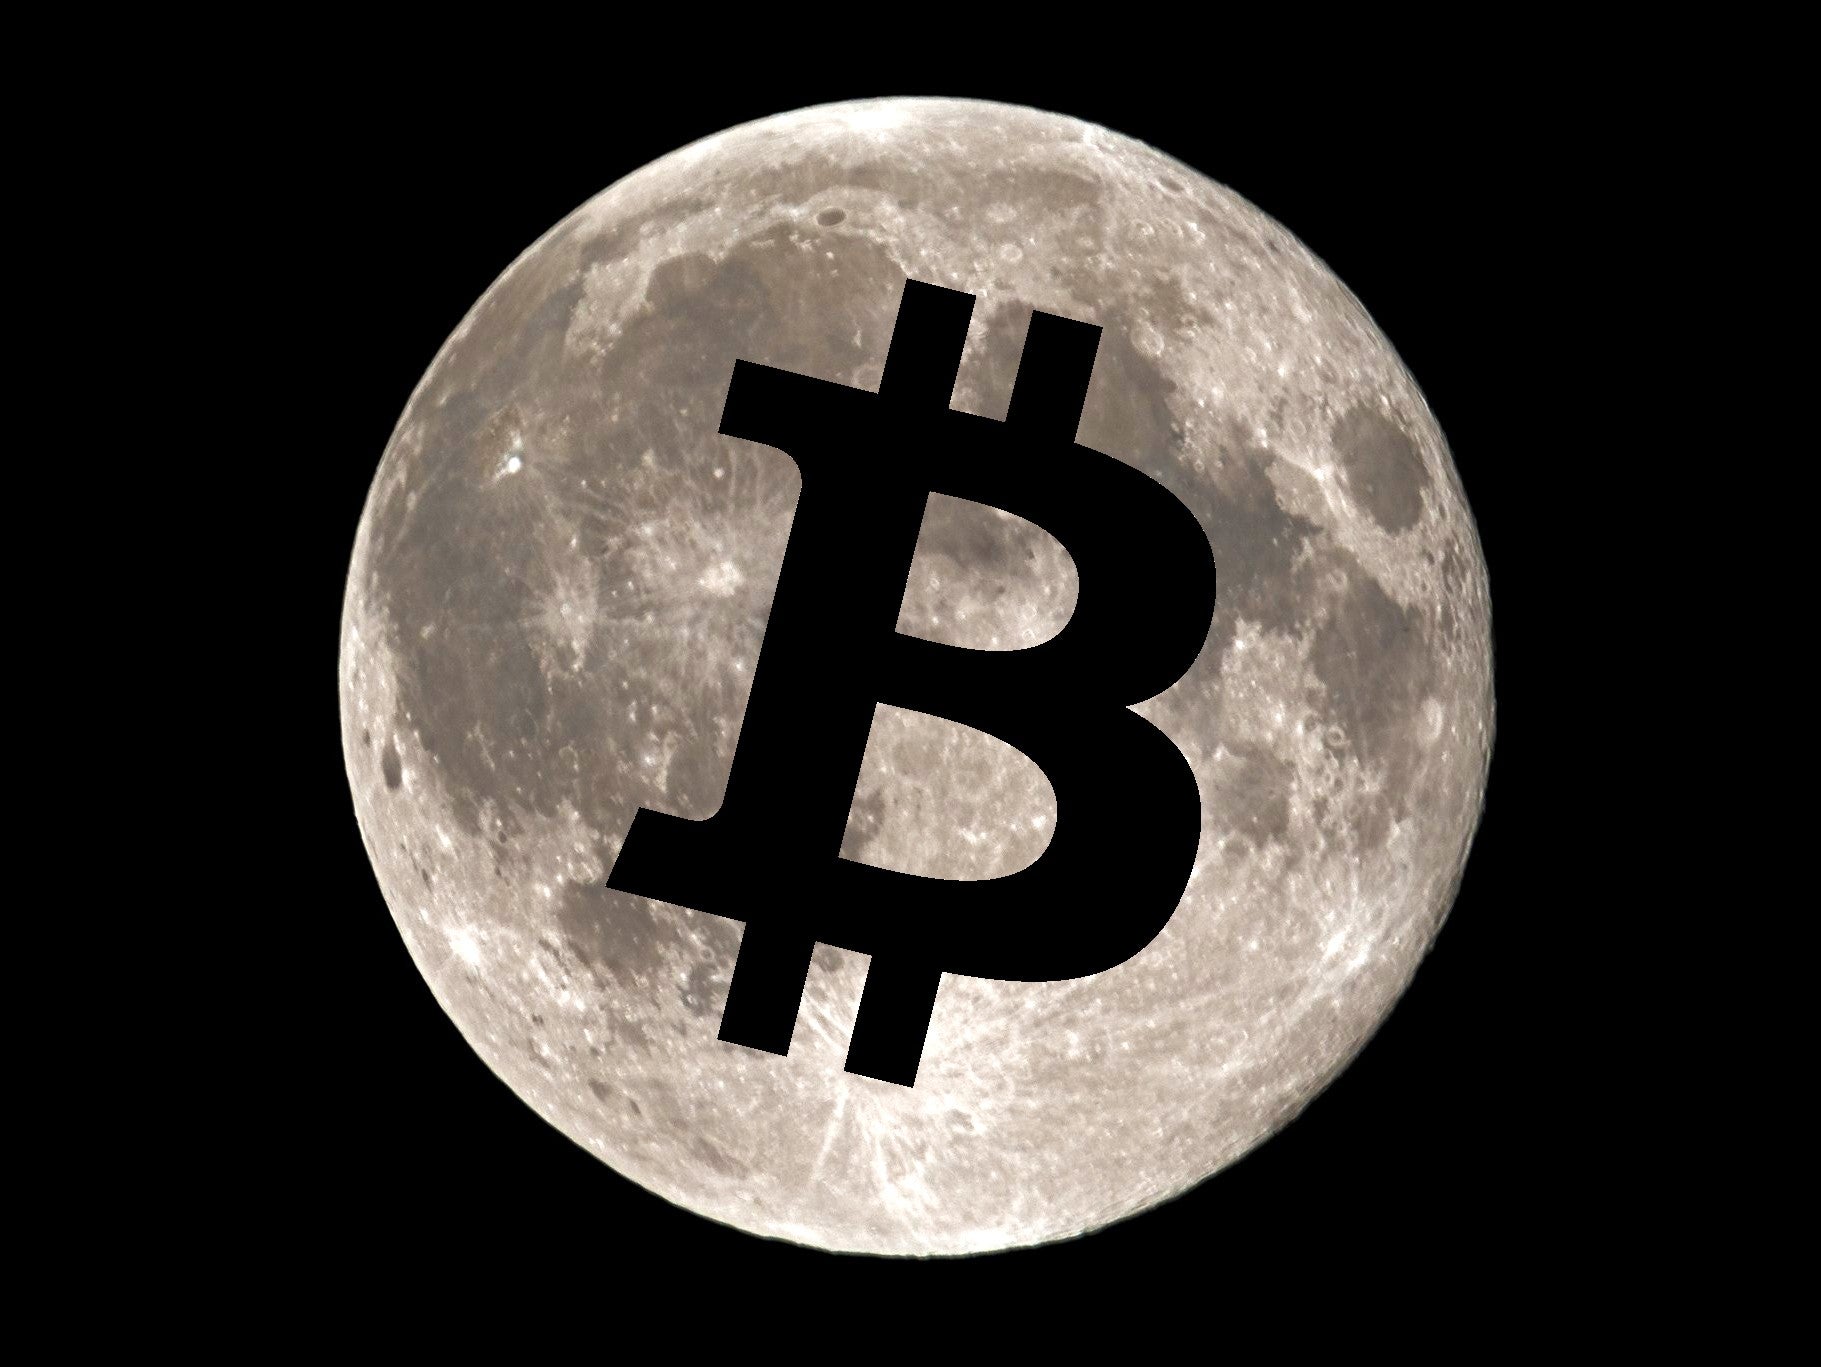 Bitcoin advocates hope its price could head ‘to the Moon’ in 2021